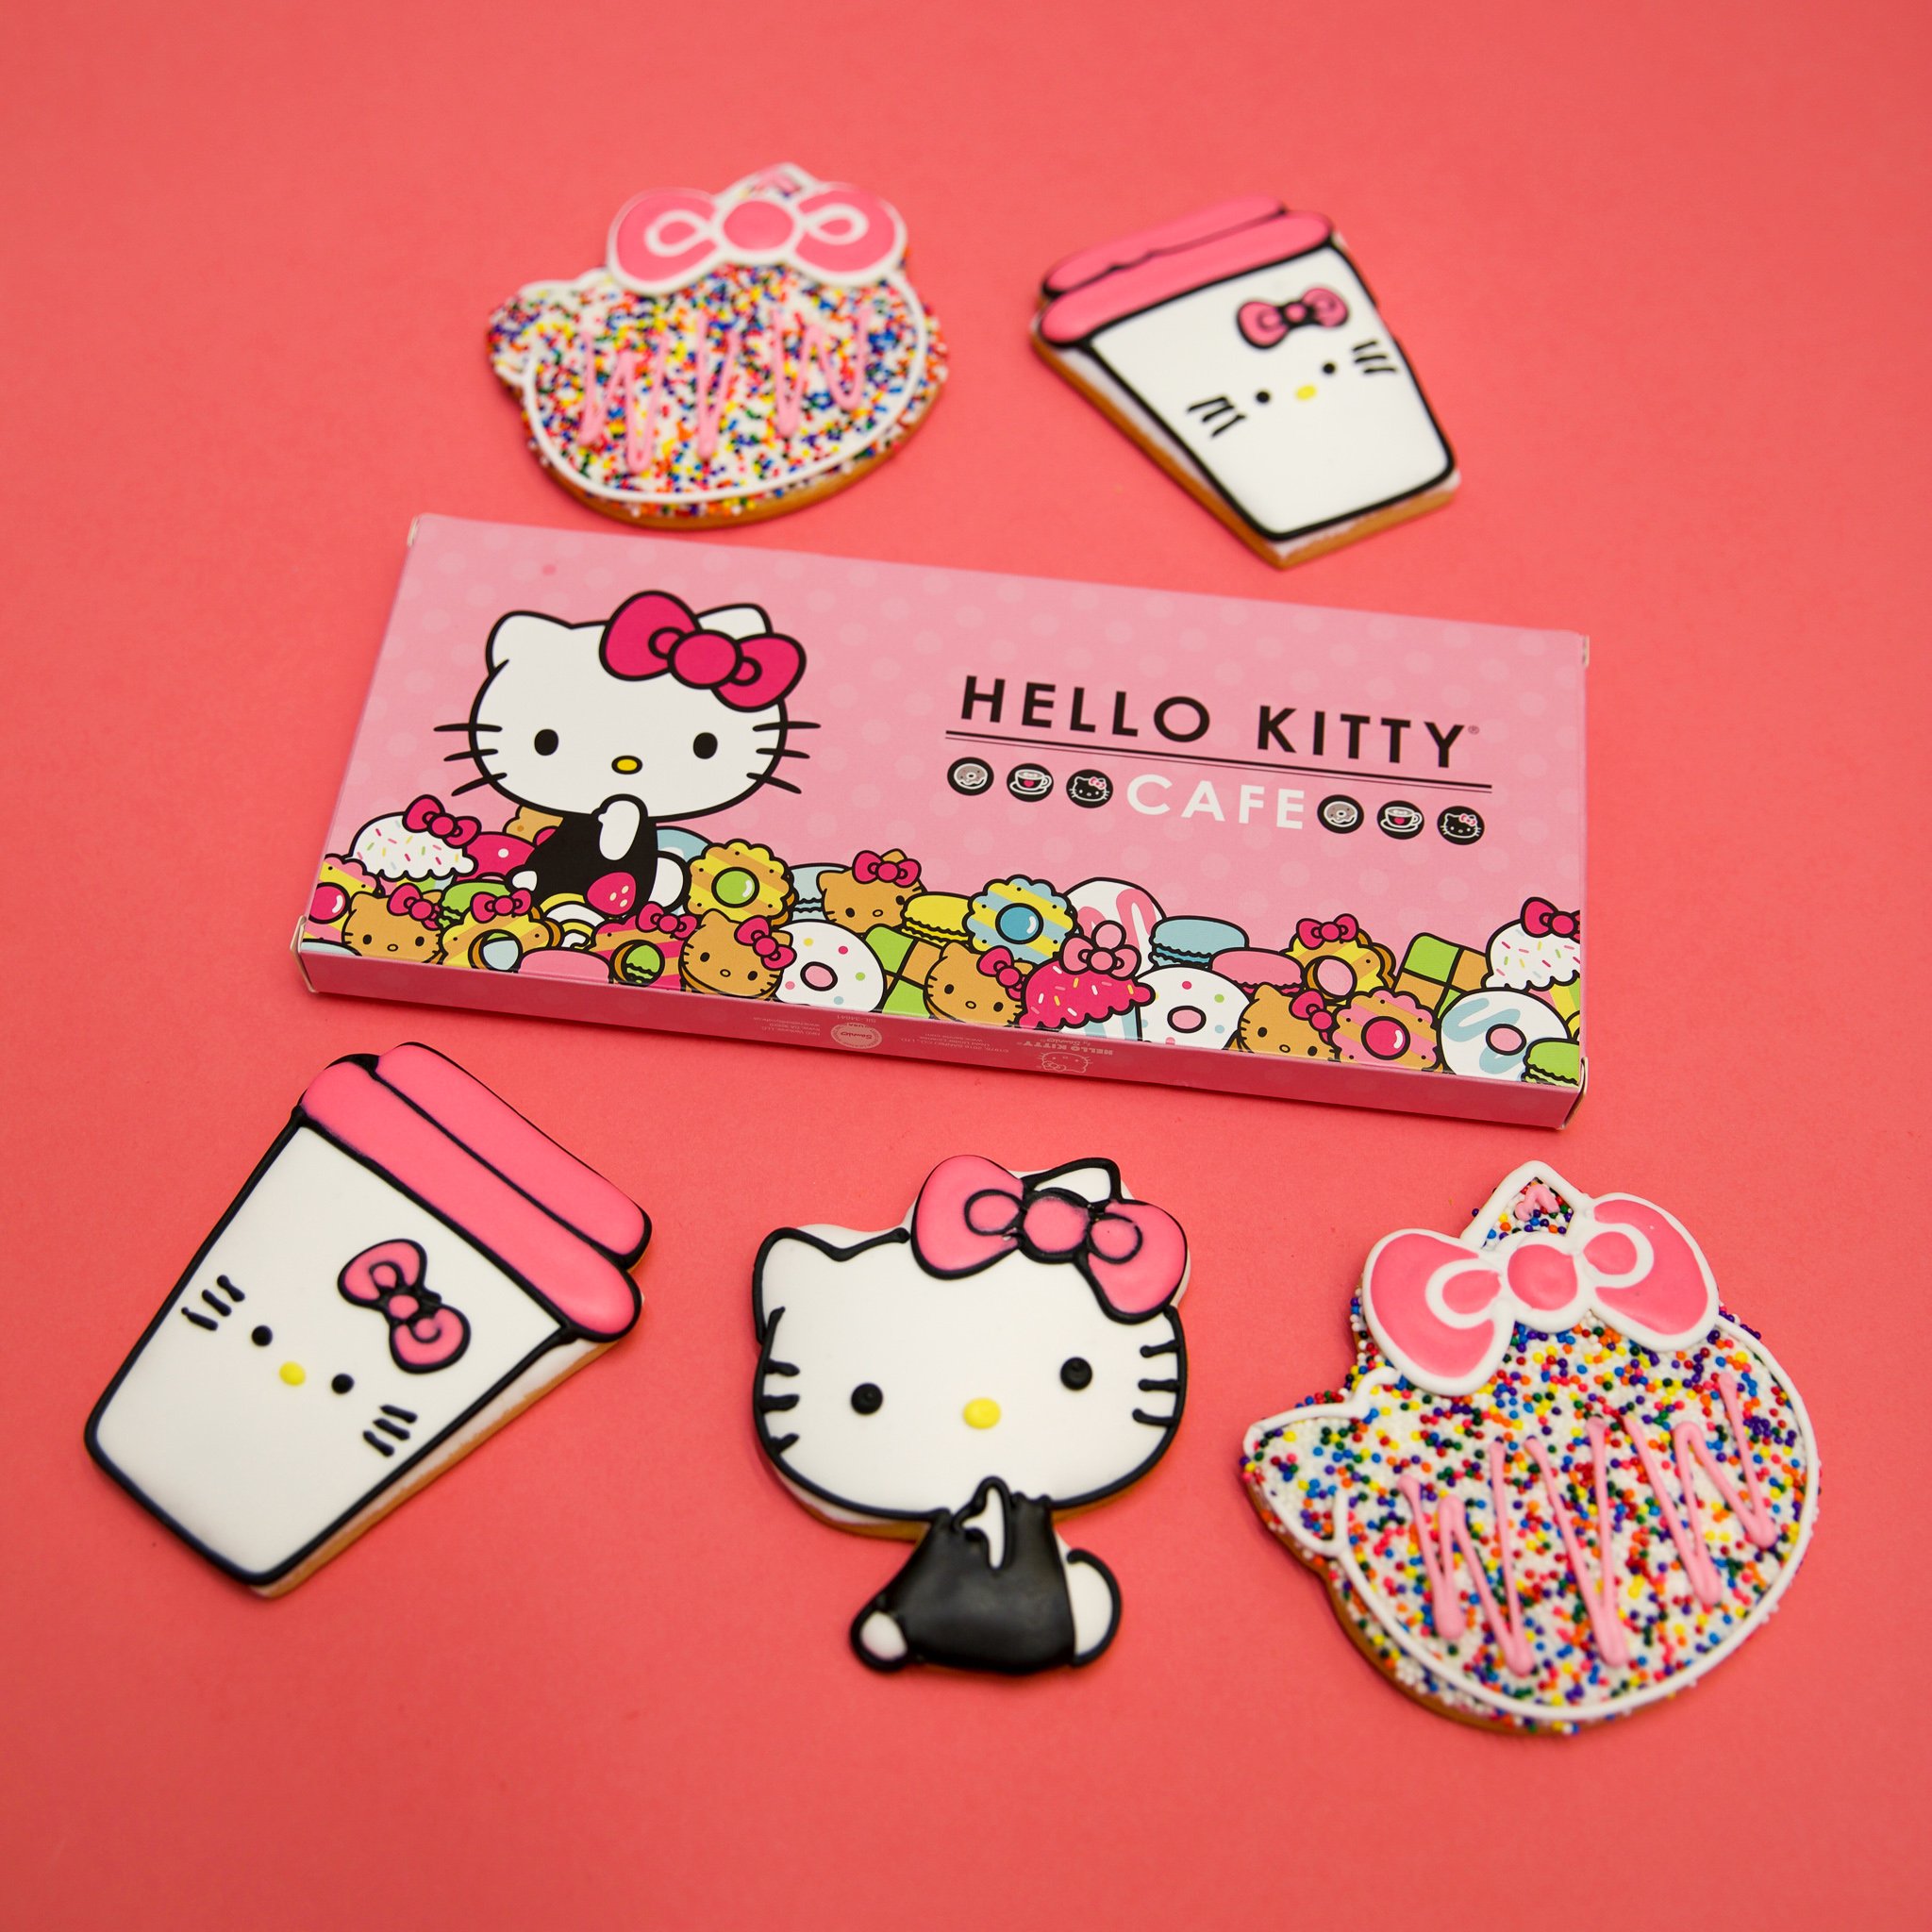 PHOTOS: Hello Kitty Cafe Truck's Menu Items and Collectibles